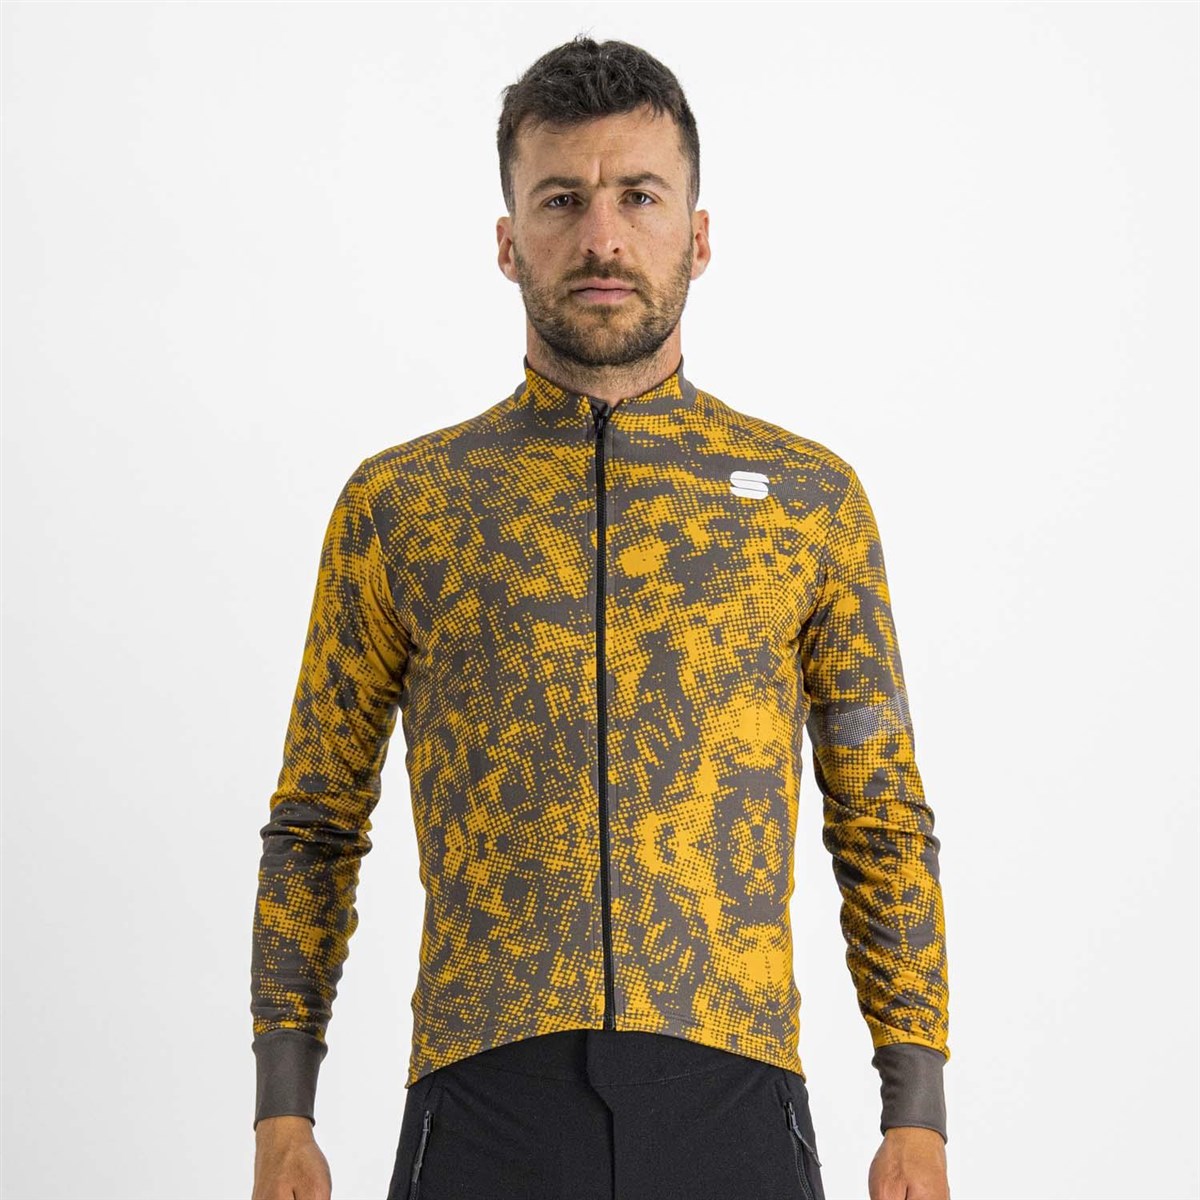 Sportful Escape Supergiara Thermal Long Sleeve Cycling Jersey product image